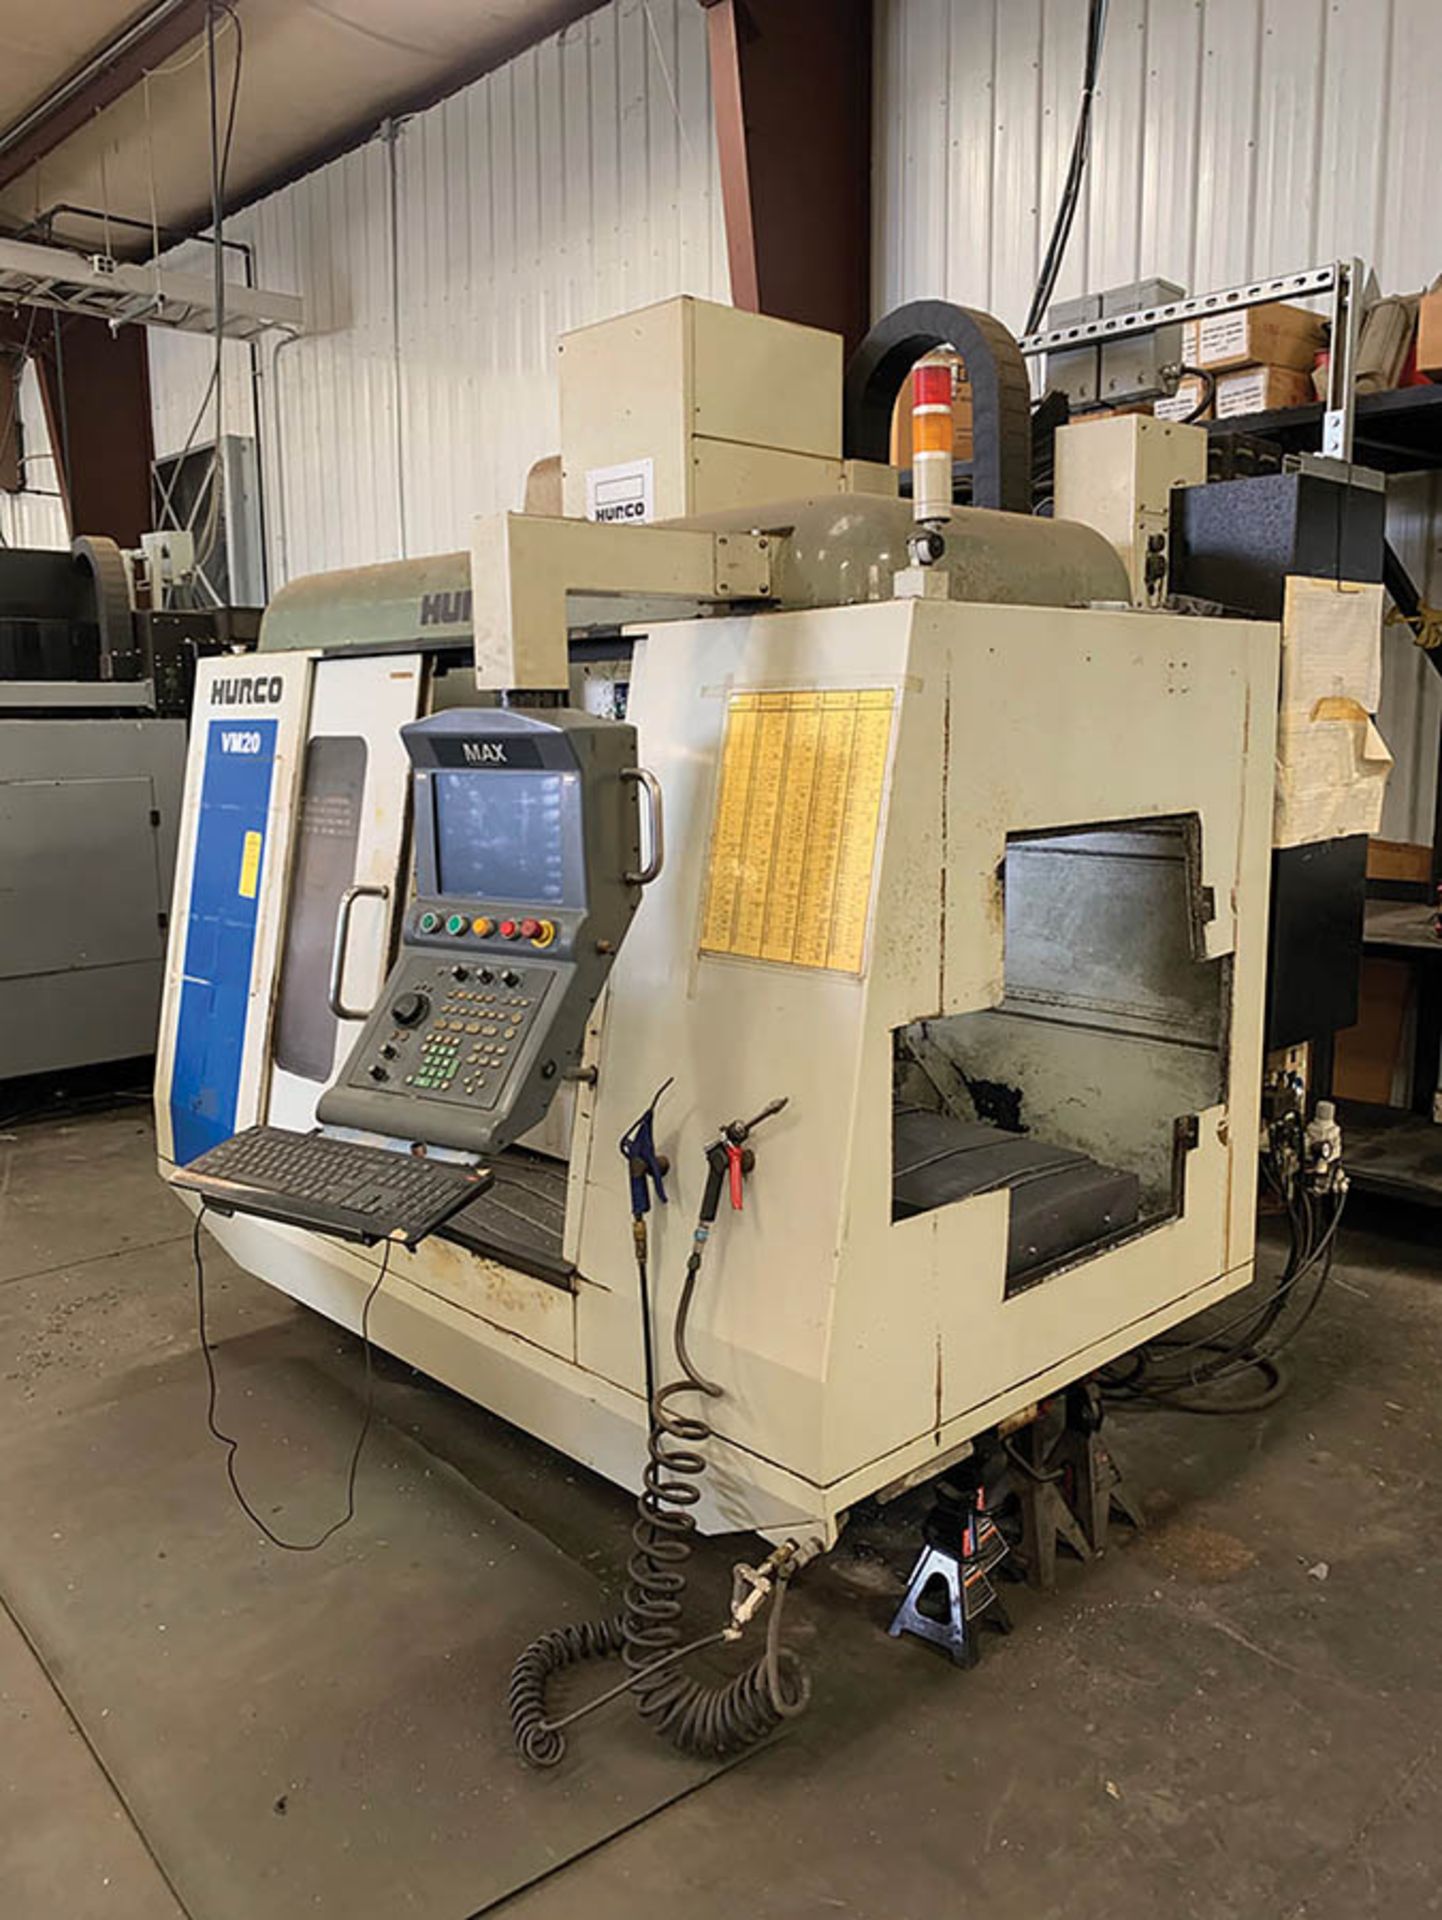 HURCO VM20 CNC VERTICAL MACHINING CENTER, (2011), 46'' X 20'' TABLE, 20 POSITION ATC, CAT 40 TAPER - Image 2 of 2